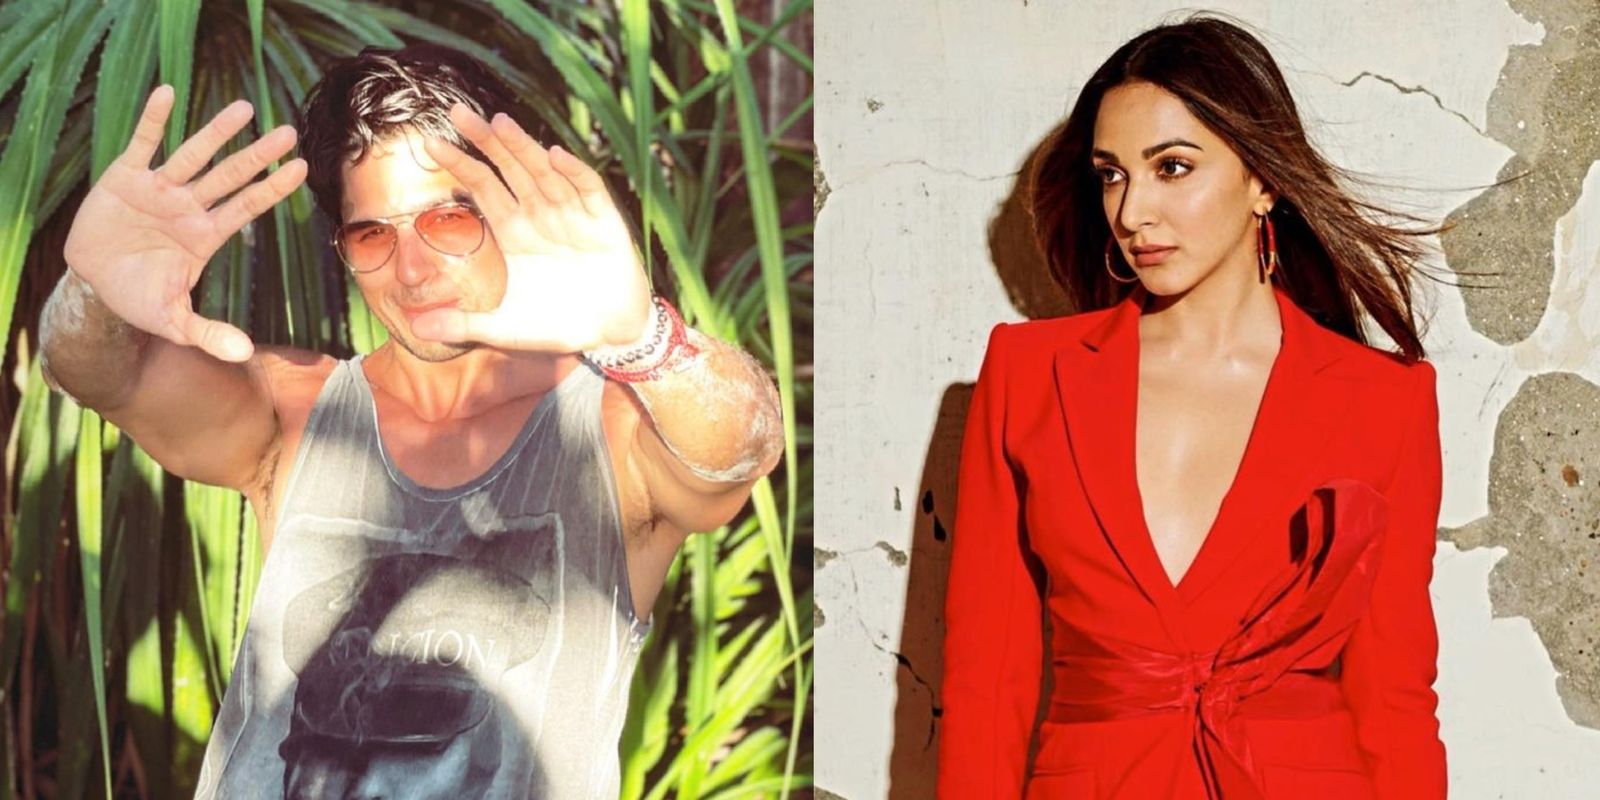 Kiara Advani’s comment on Sidharth Malhotra’s sunkissed picture leaves tongues wagging yet again